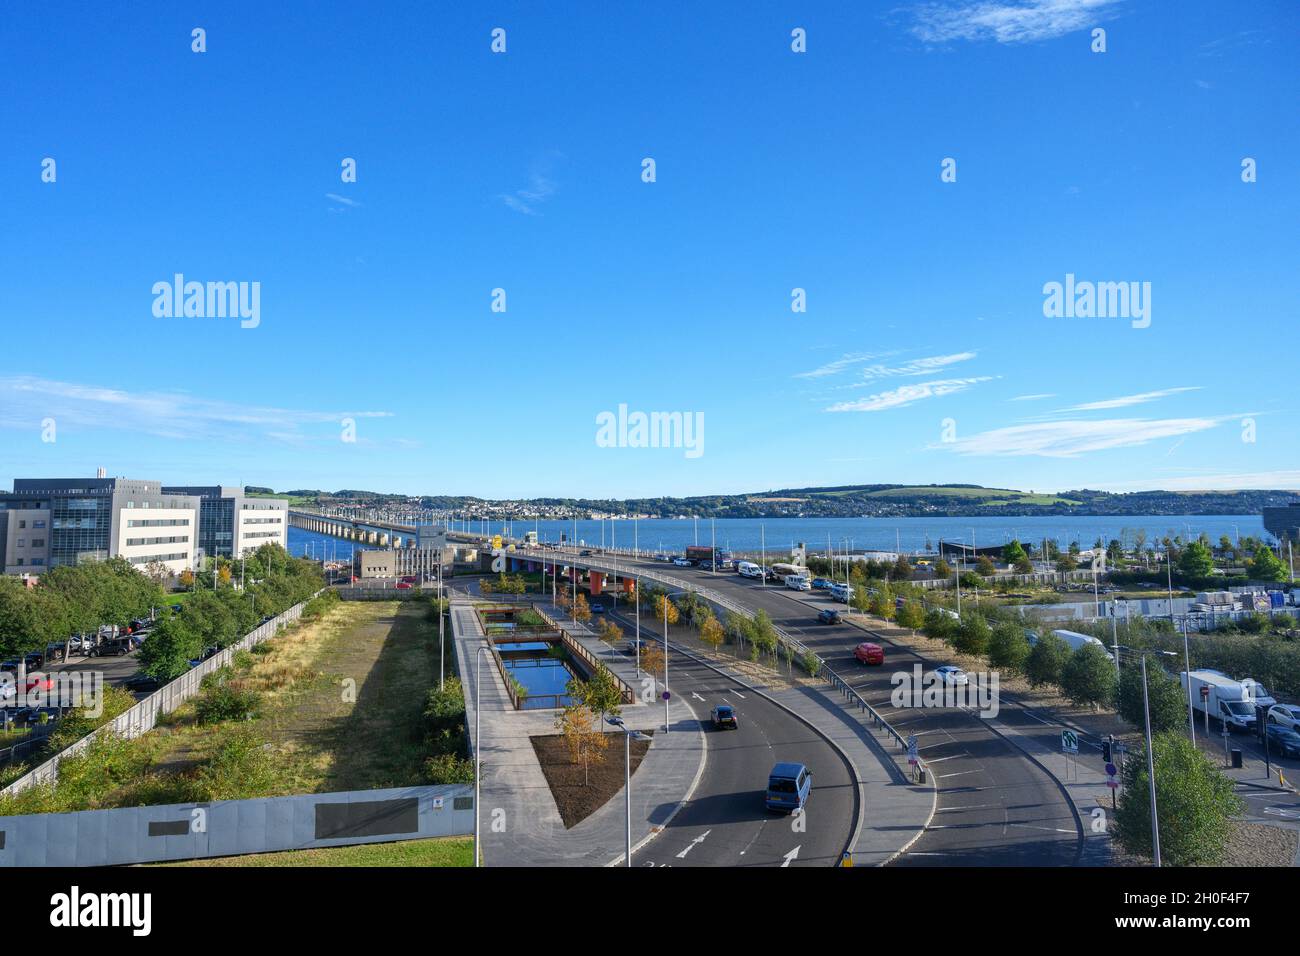 View from the Holiday Inn Express looking towards the Tay Road Bridge, Dundee, Scotland, UK Stock Photo